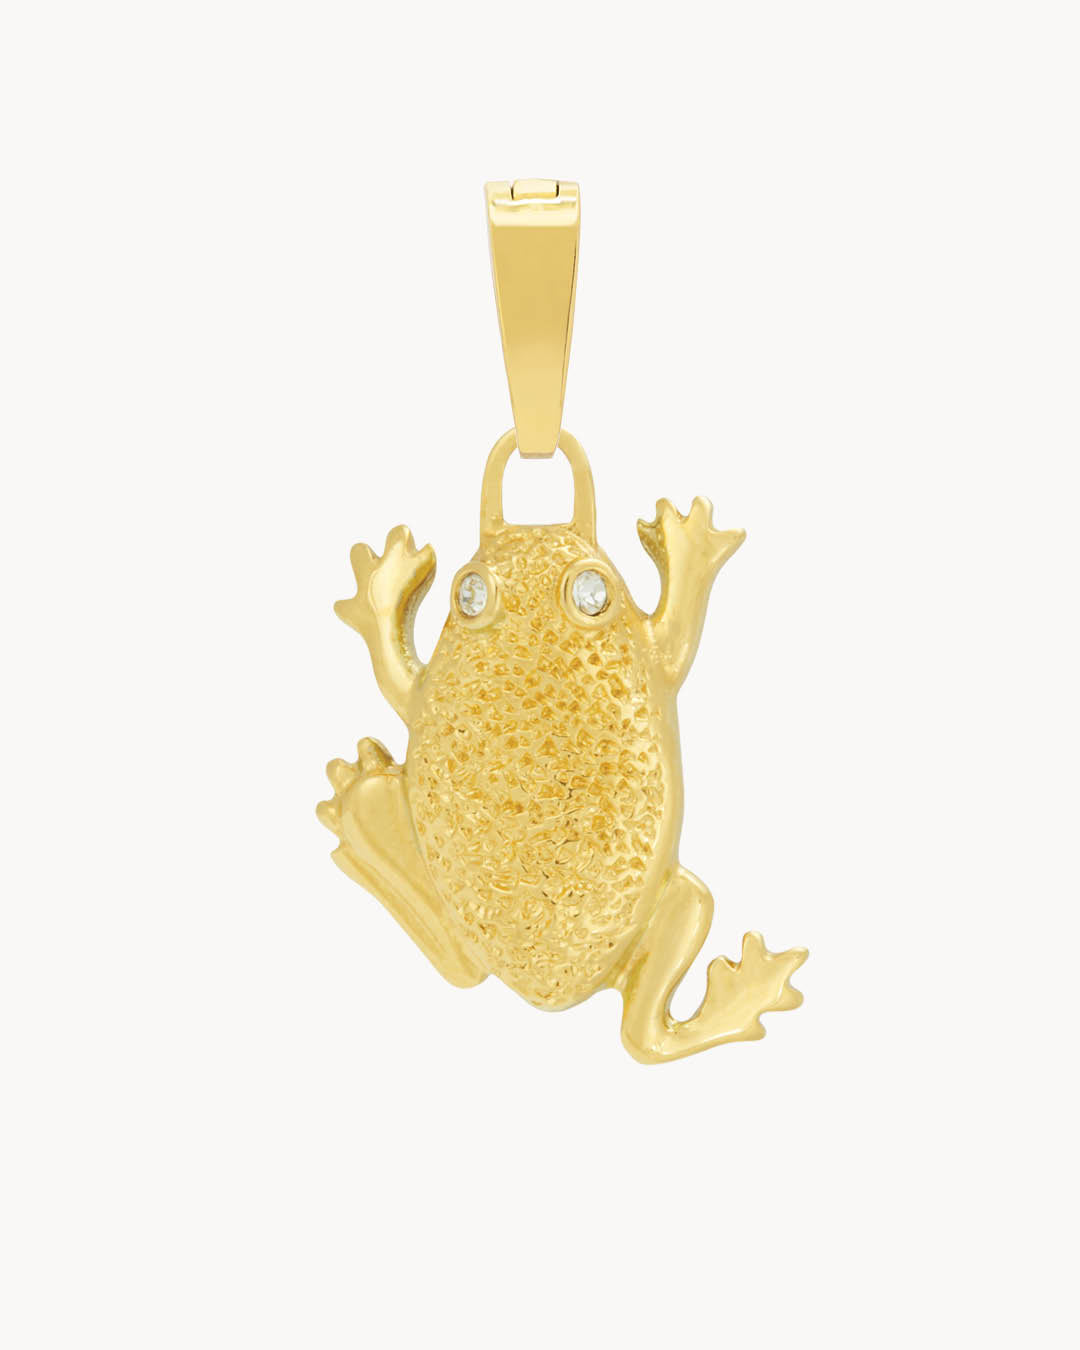 Buy Frog Necklace Online In India - Etsy India